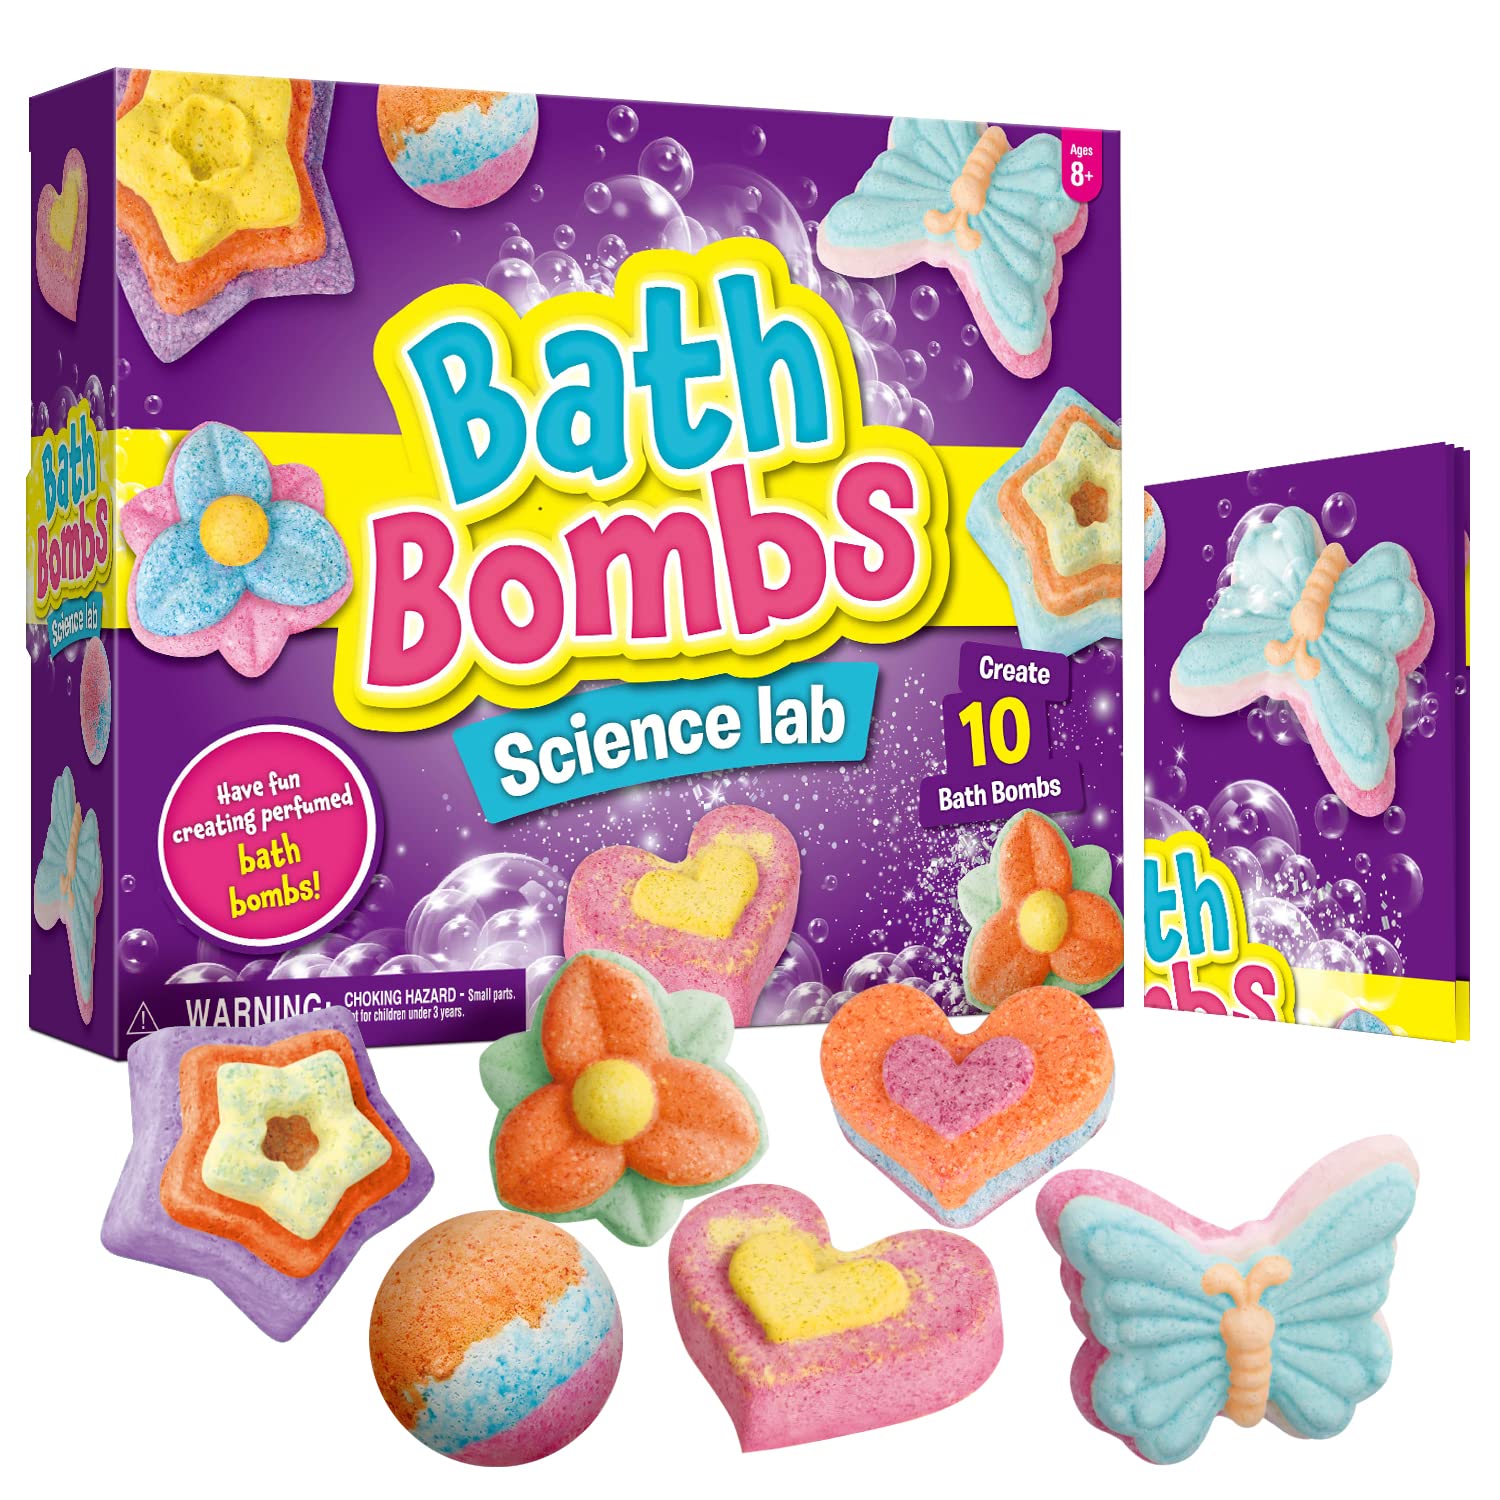 XXTOYS Bath Bombs Science Lab - Create 10 Bath Bombs Bath Toys for Kids -  Great Gifts for Girls Age 8-12 Crafts Kit for Girls Spa Kit for Girls